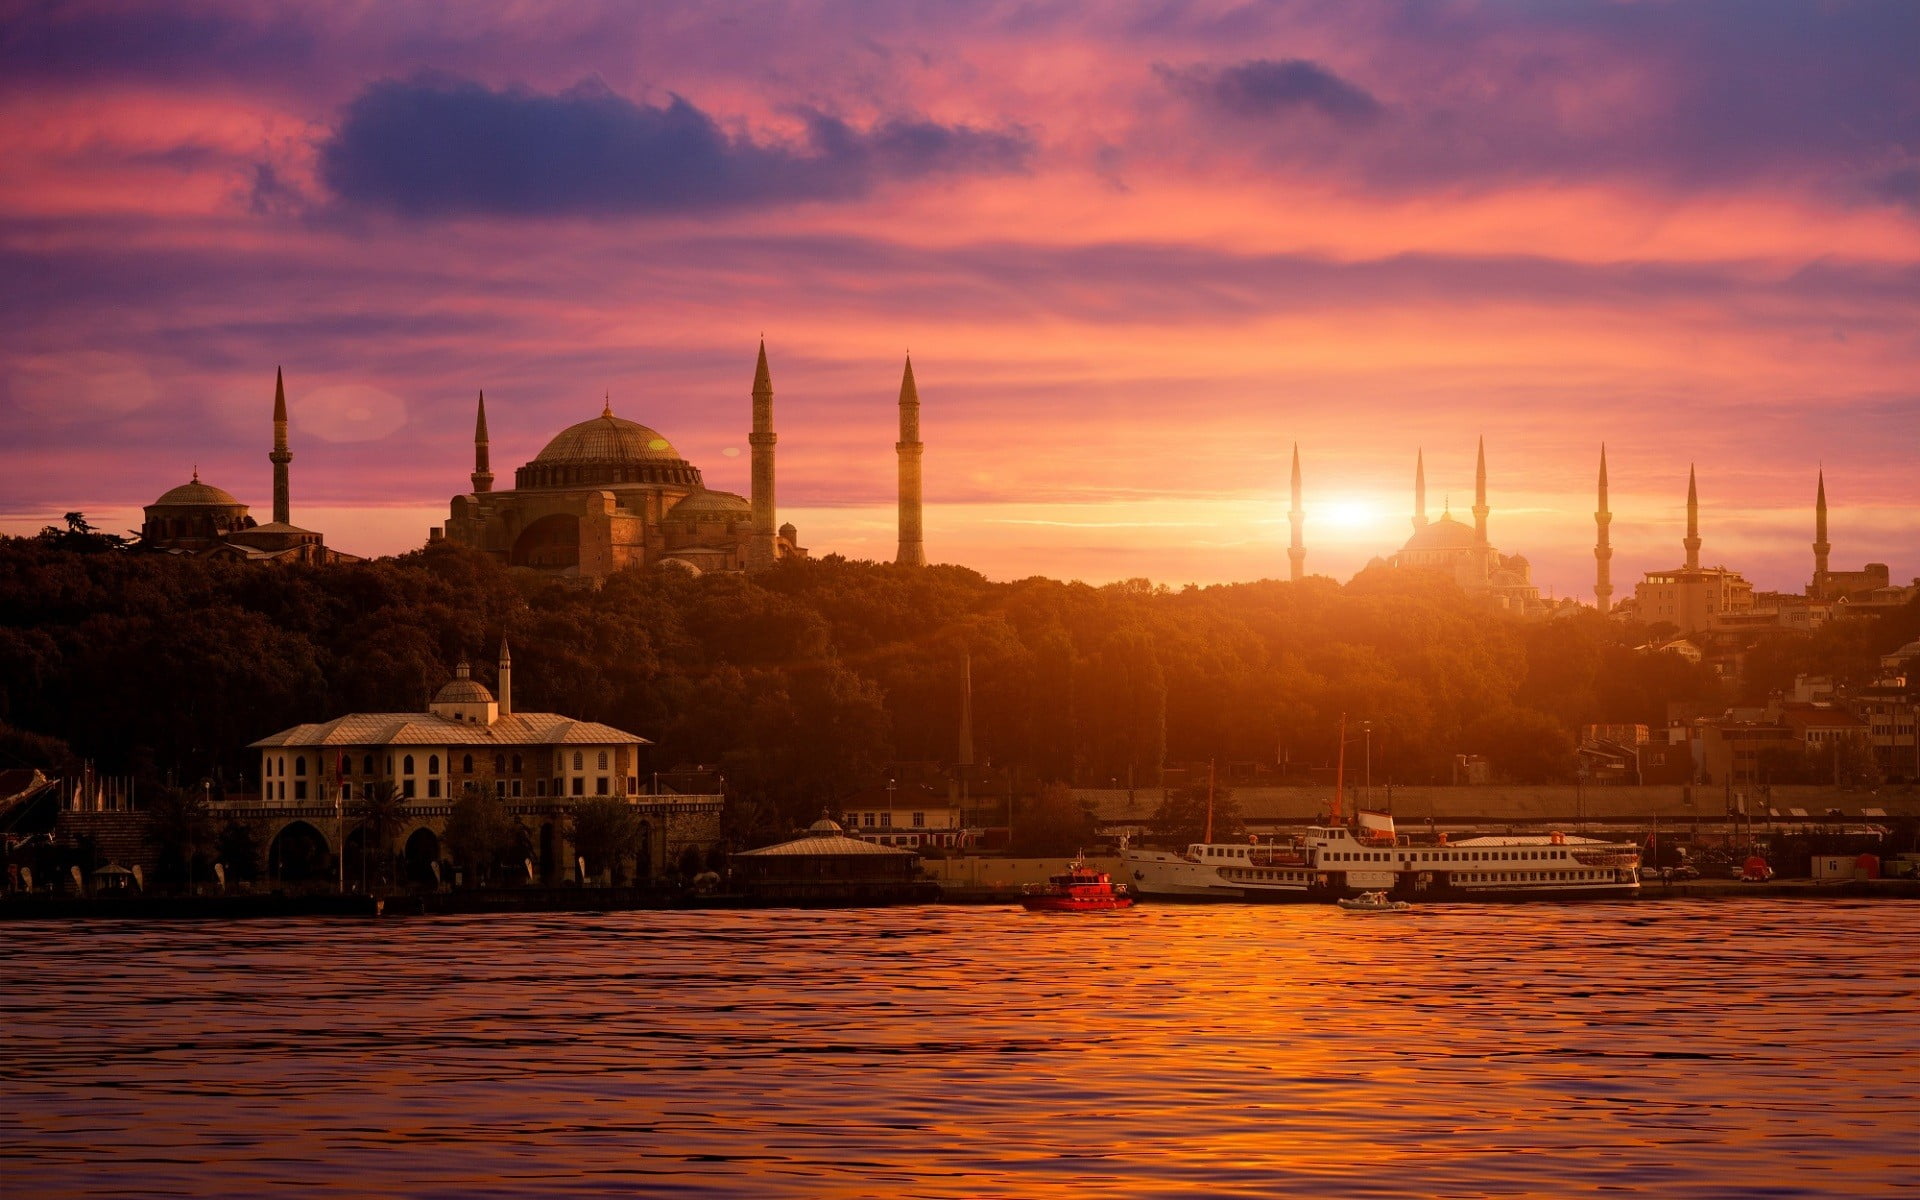 mosques near buildings and body of water during golden hours